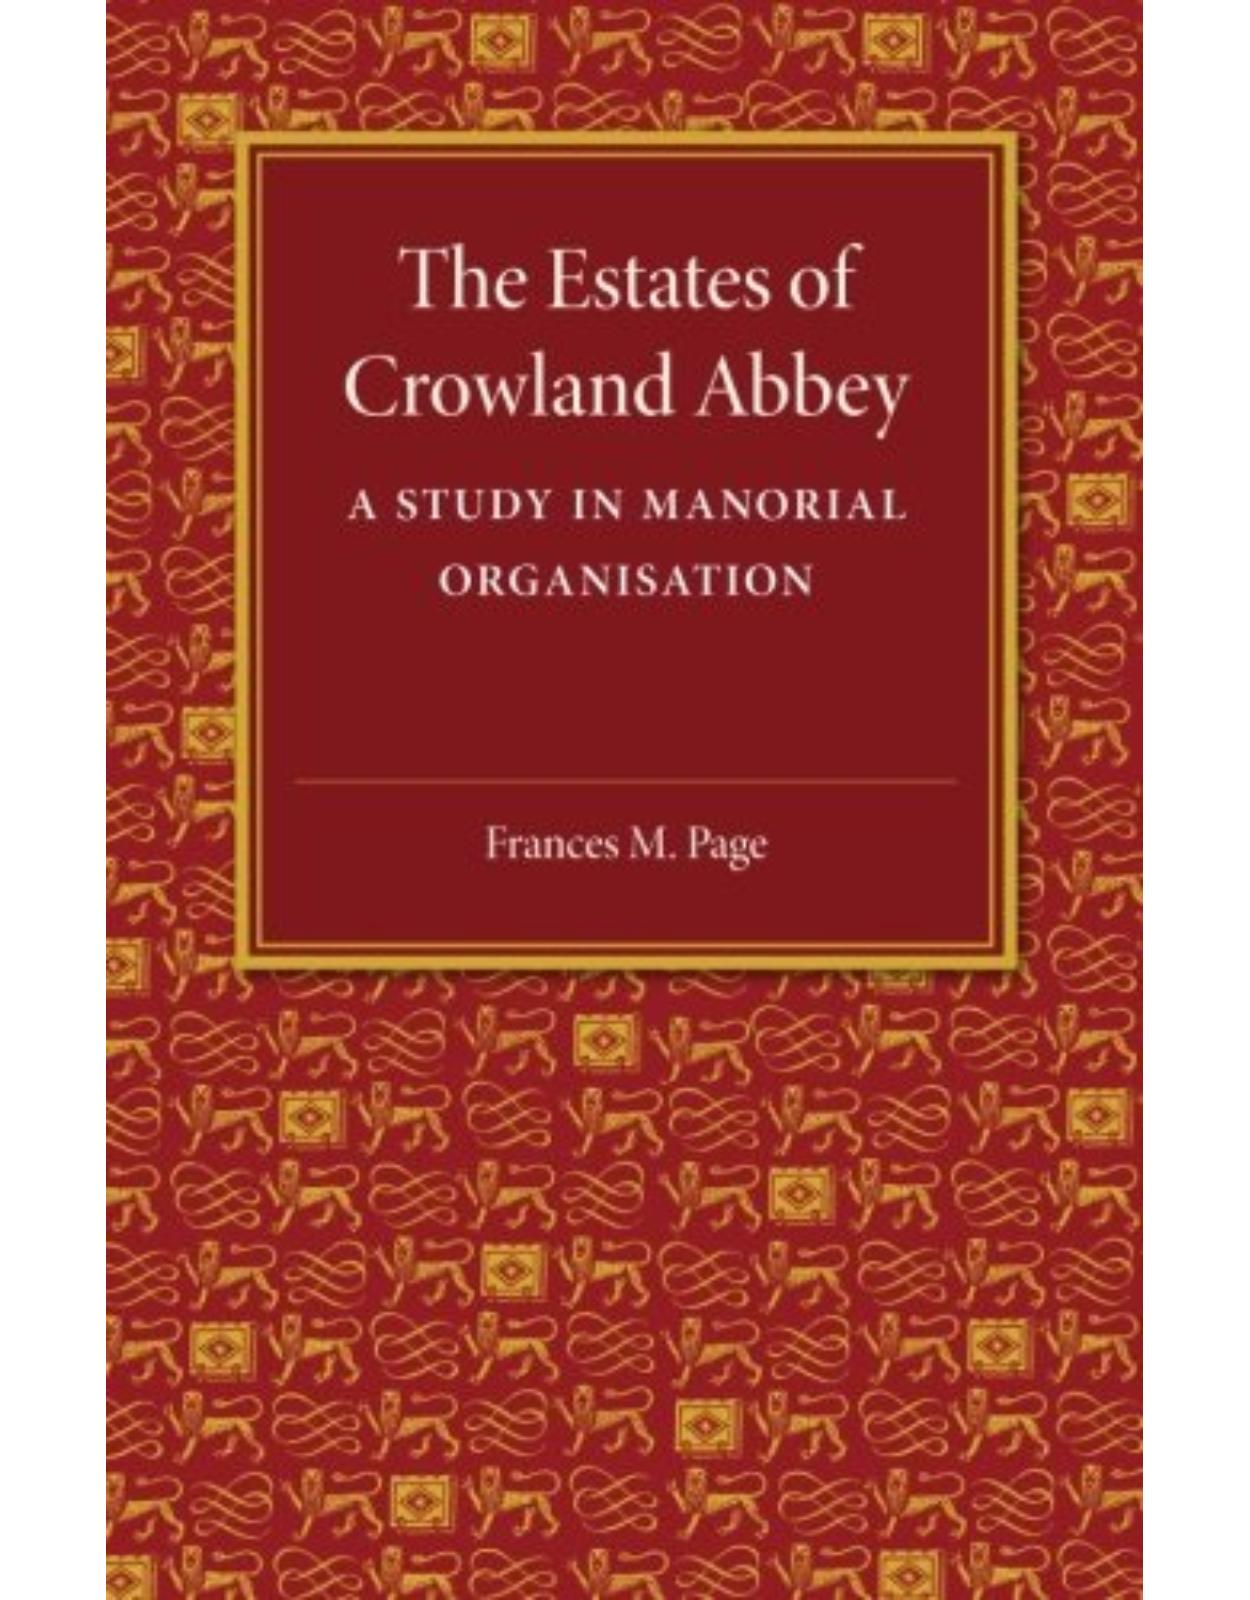 The Estates of Crowland Abbey: A Study in Manorial Organisation